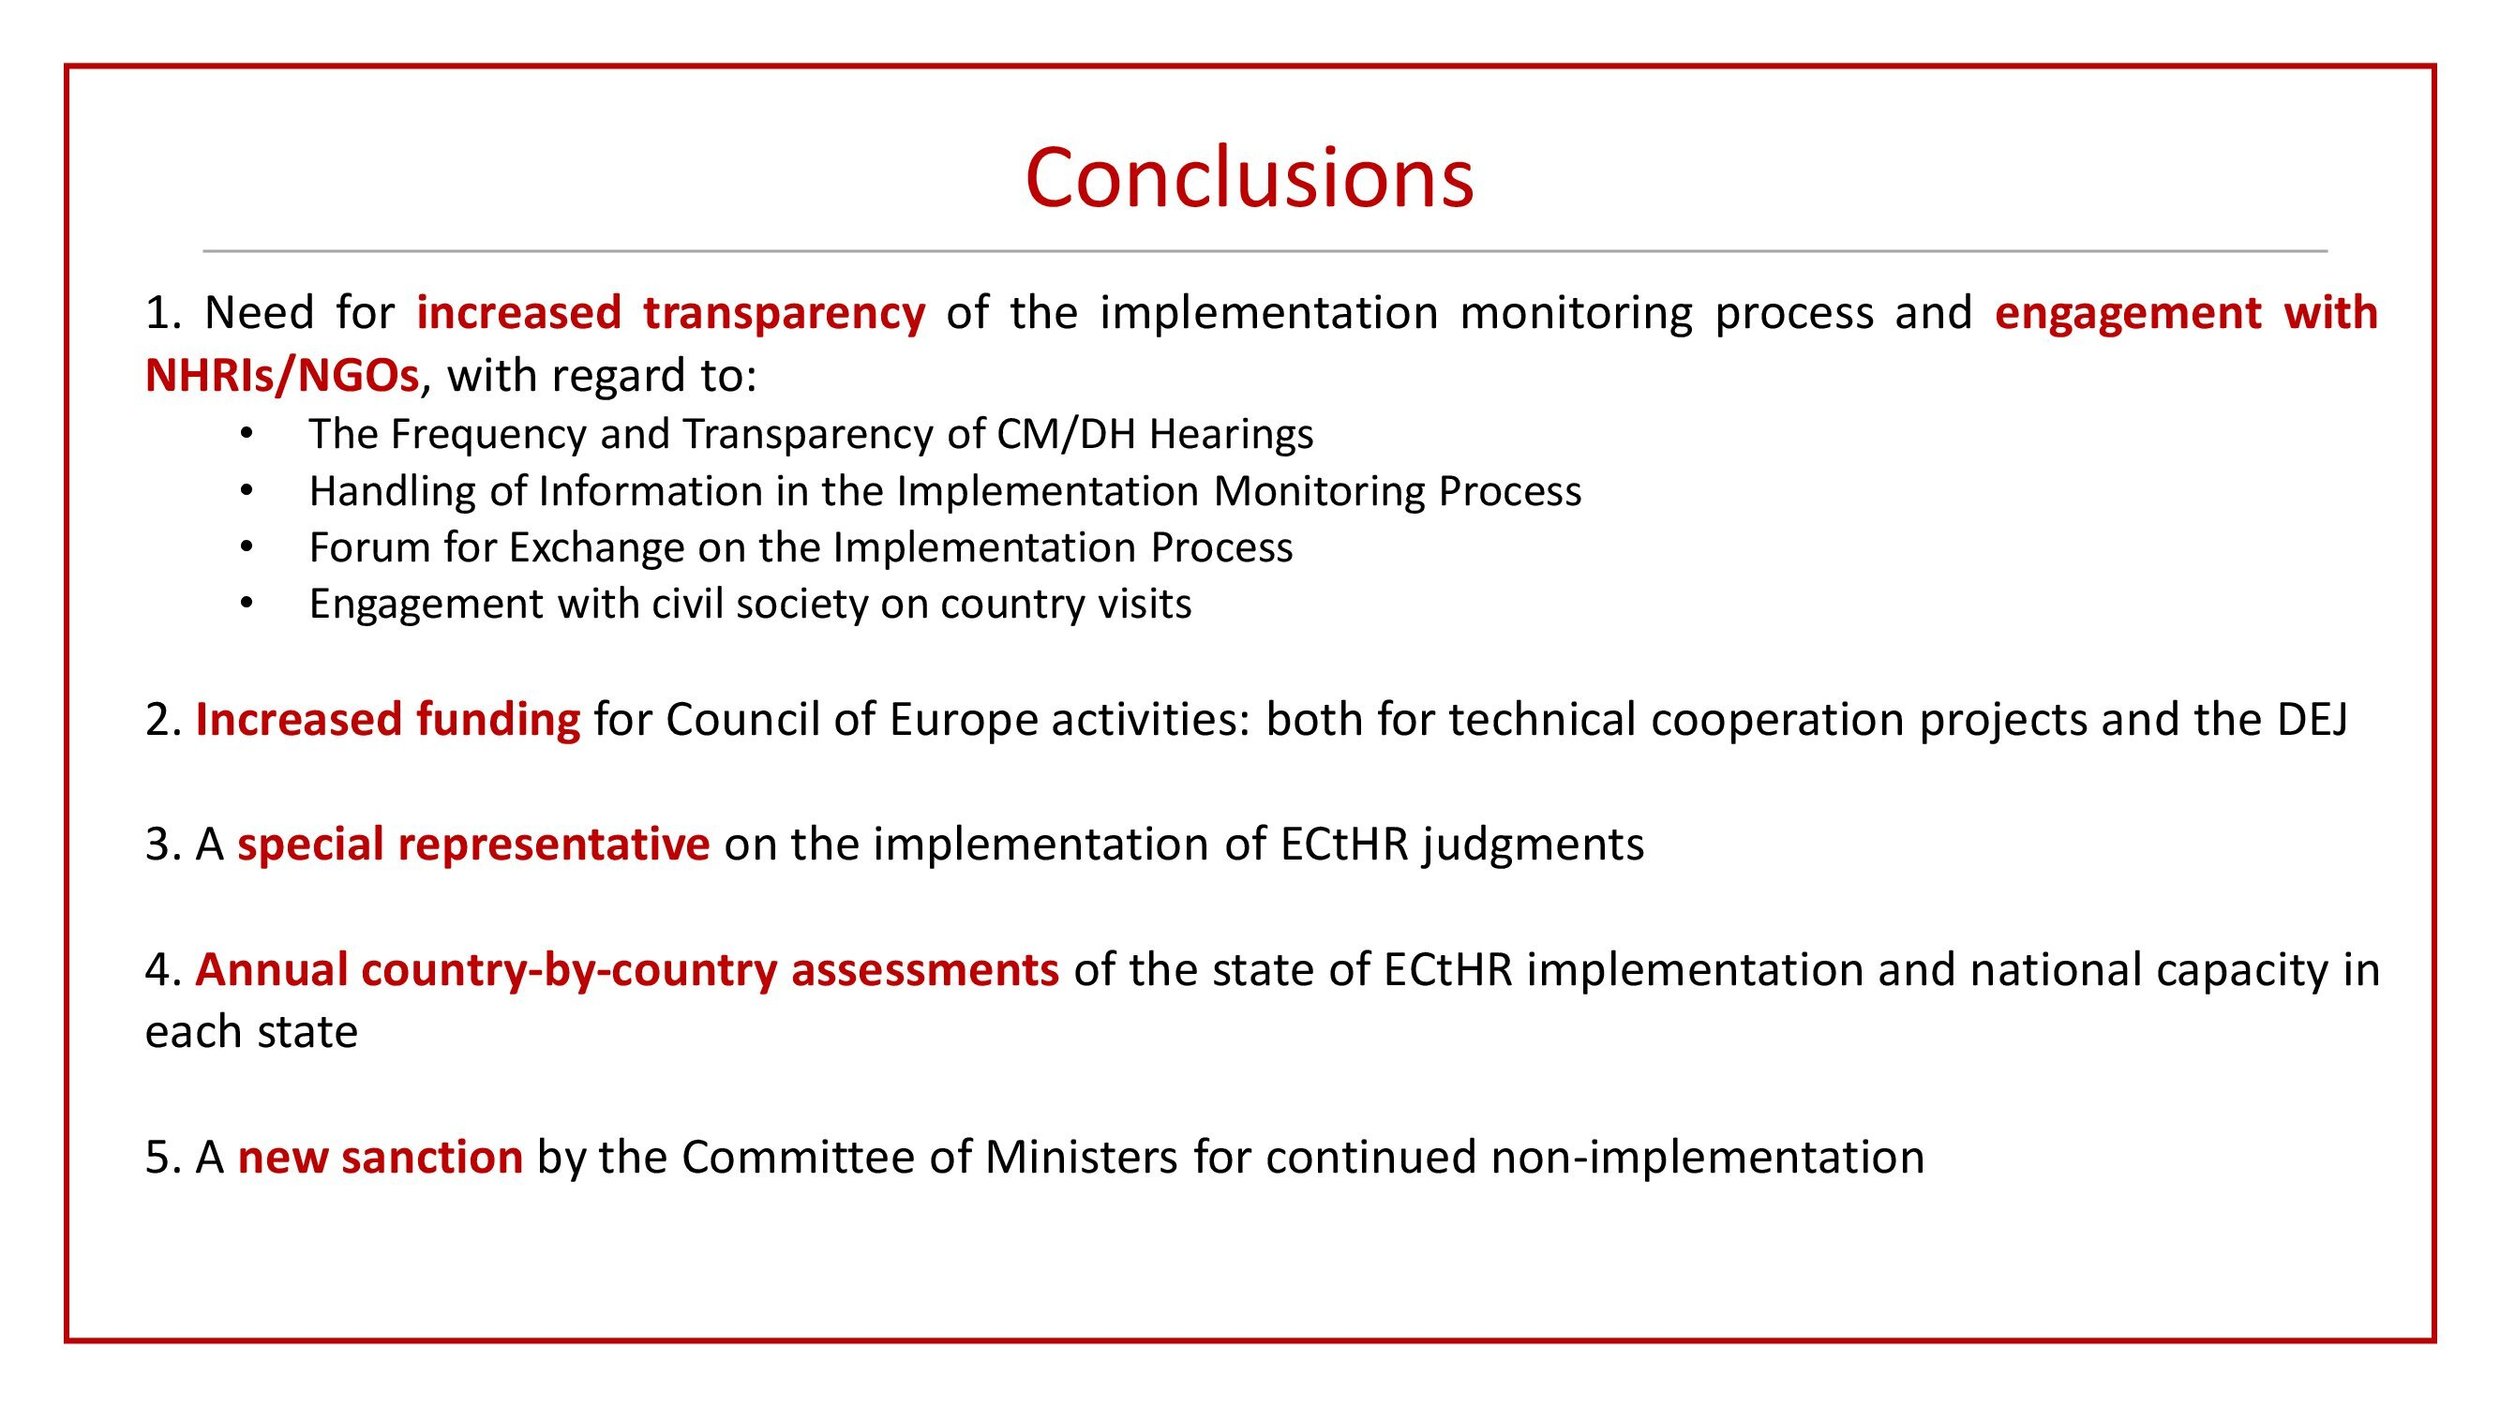 2022_06_The activities of the Council of Europe relating to the implementation of ECtHR judgments_updated_00012.jpg